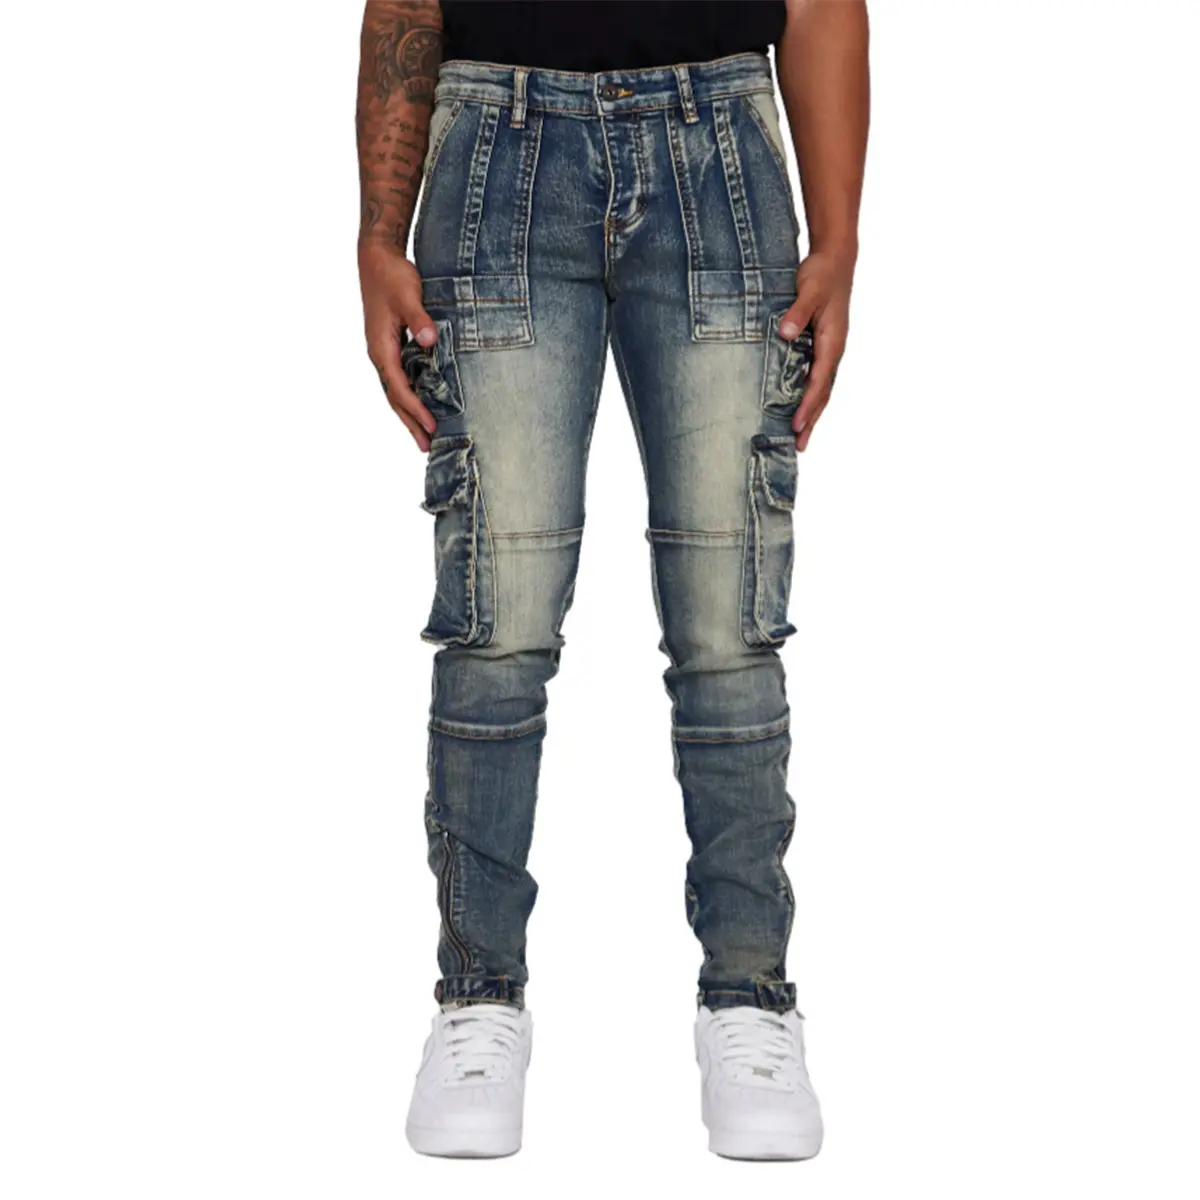 custom multi zip 3D pocket blue washed skinny distressed ripped cargo jeans men casual cargo pants with zipper ankle